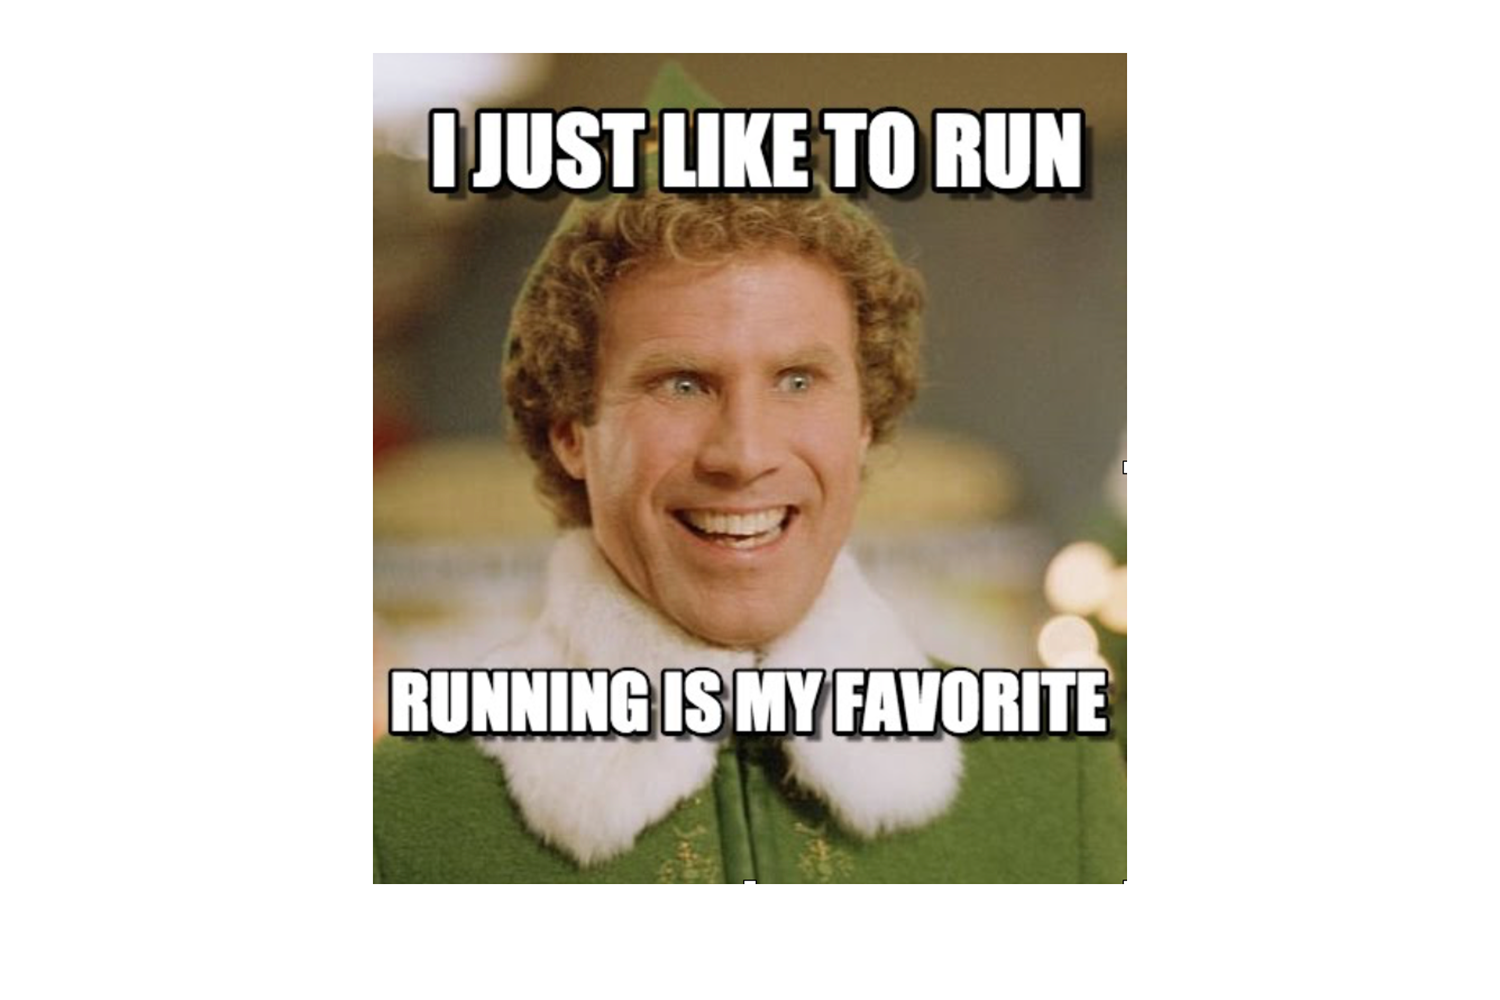 Being Fit to Run vs. Running To Get Fit